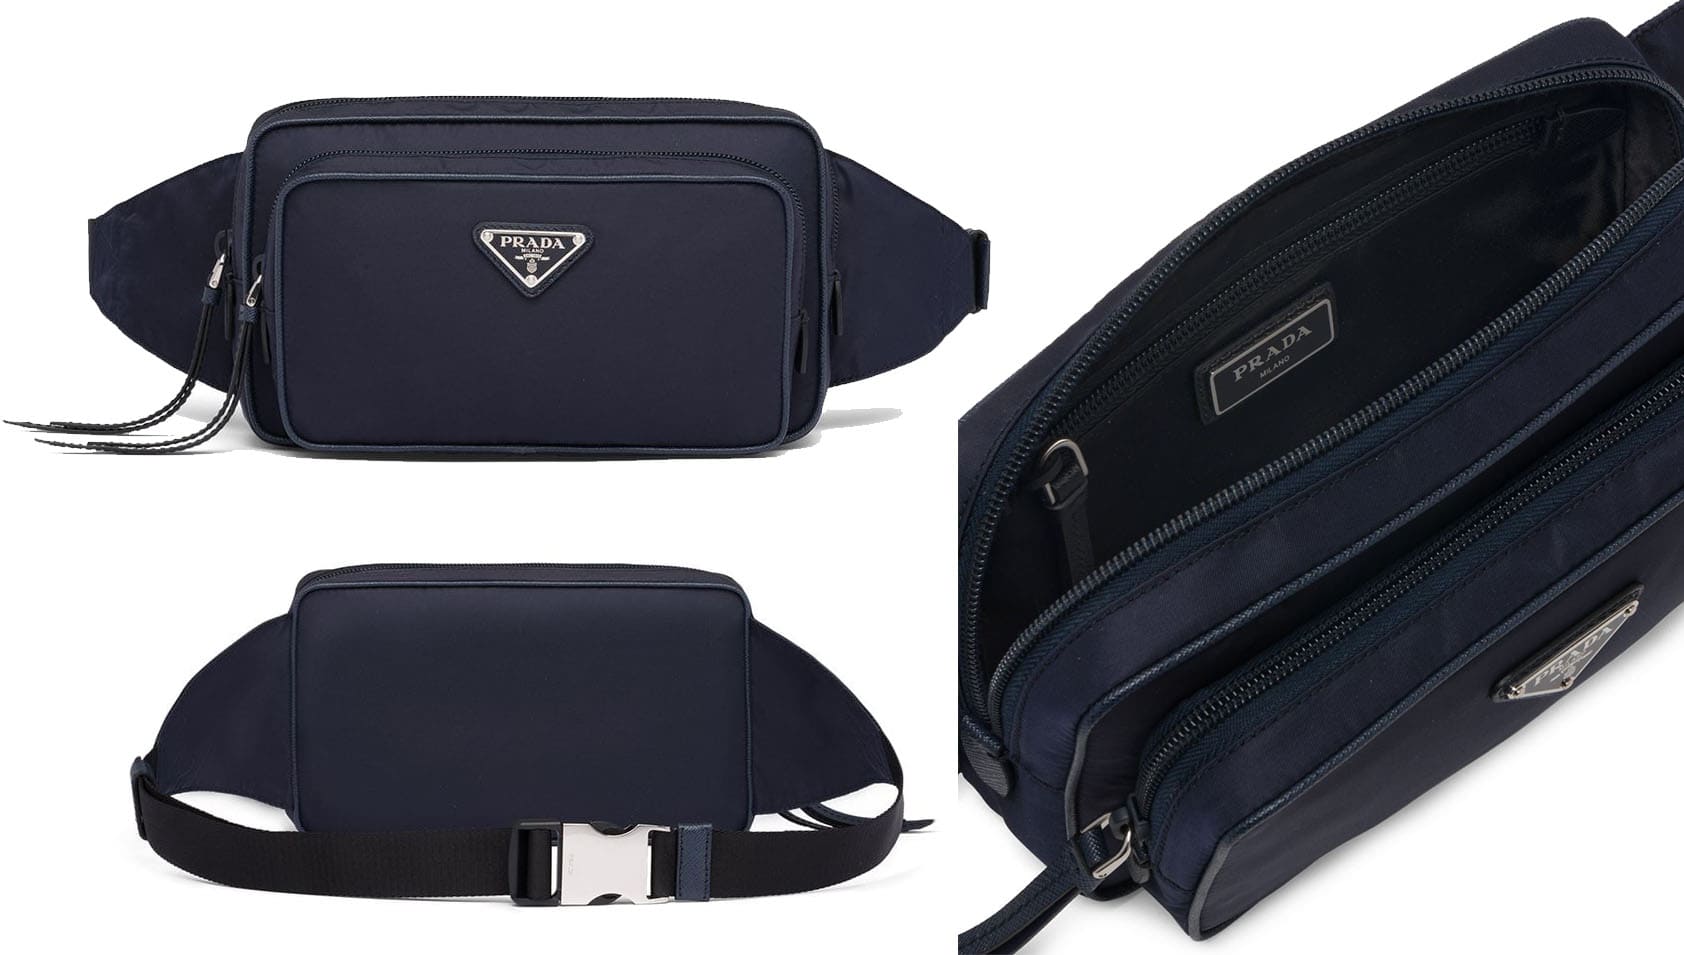 Belt bags is used to carry daily essentials and are usually worn around the waist using a belt-like strap with a triple-glide slide